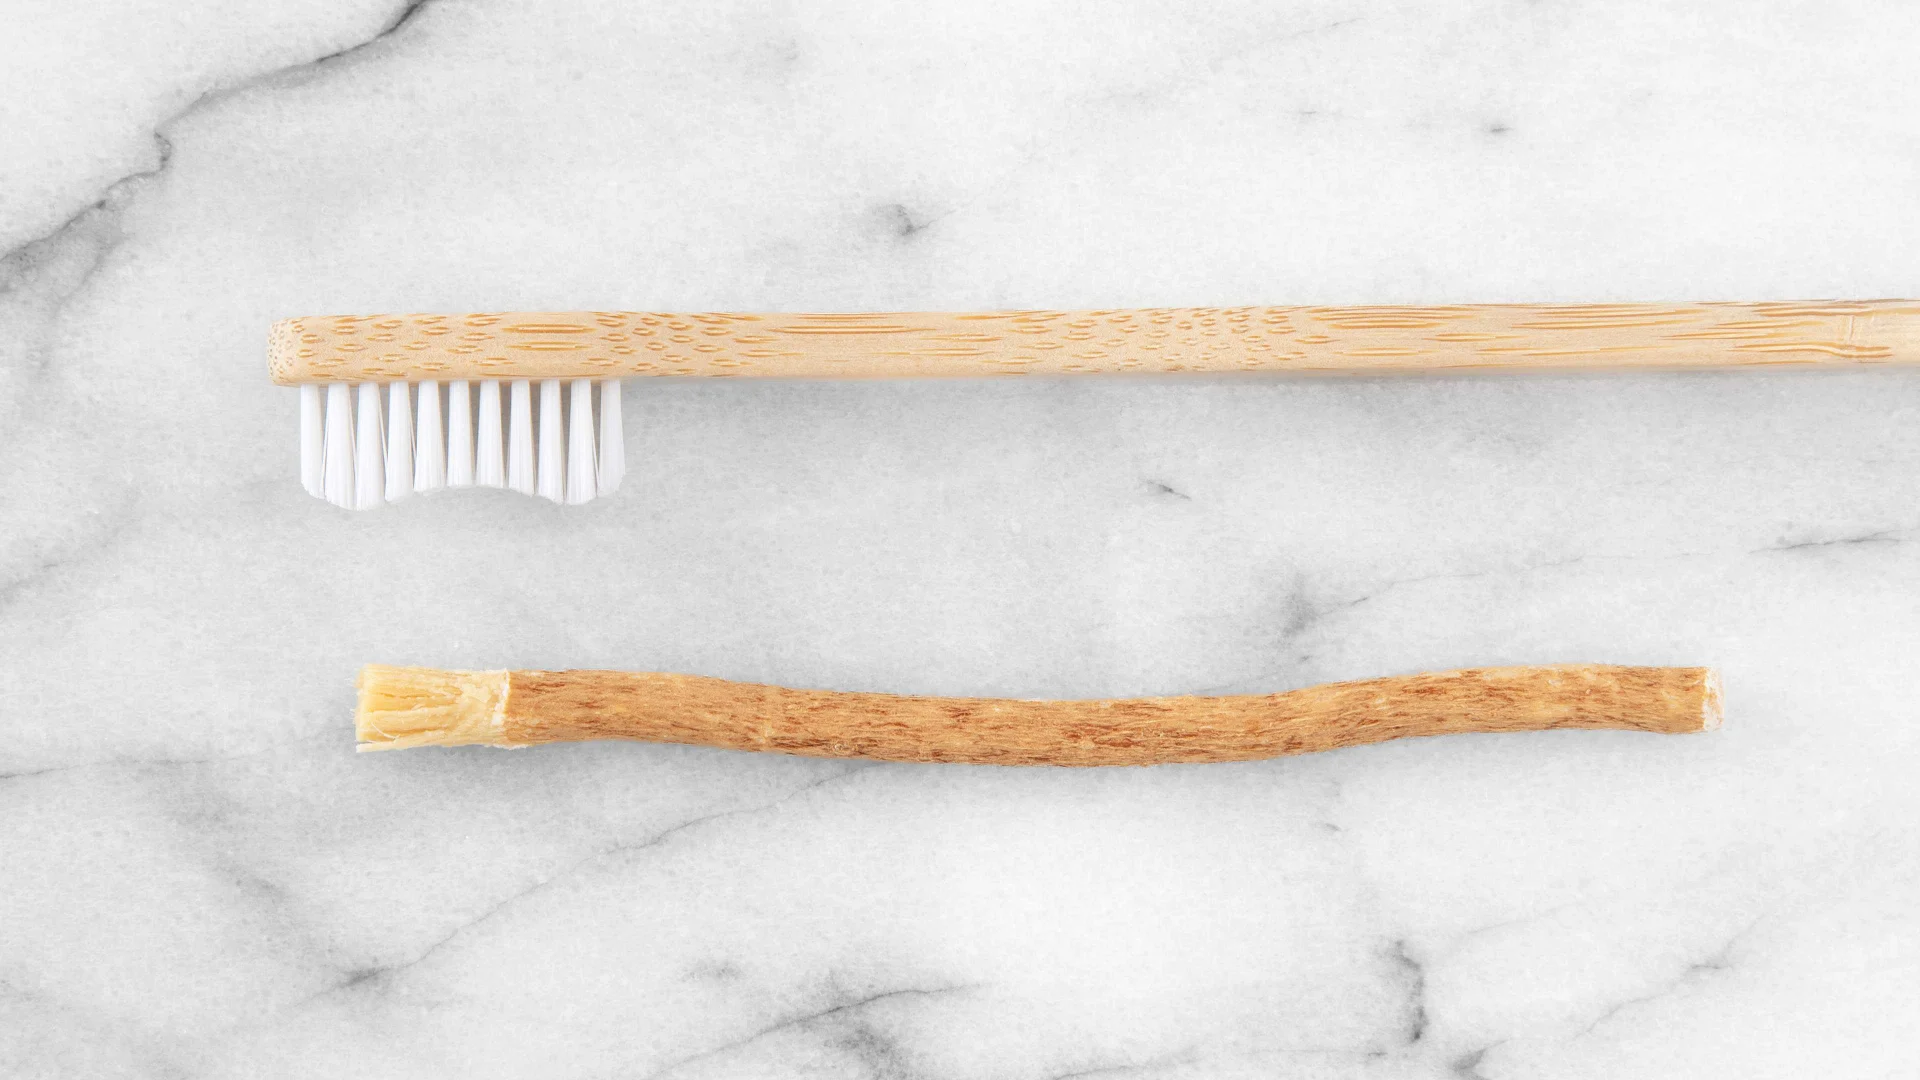 An original tooth brush and a wooden brush as we know it today.